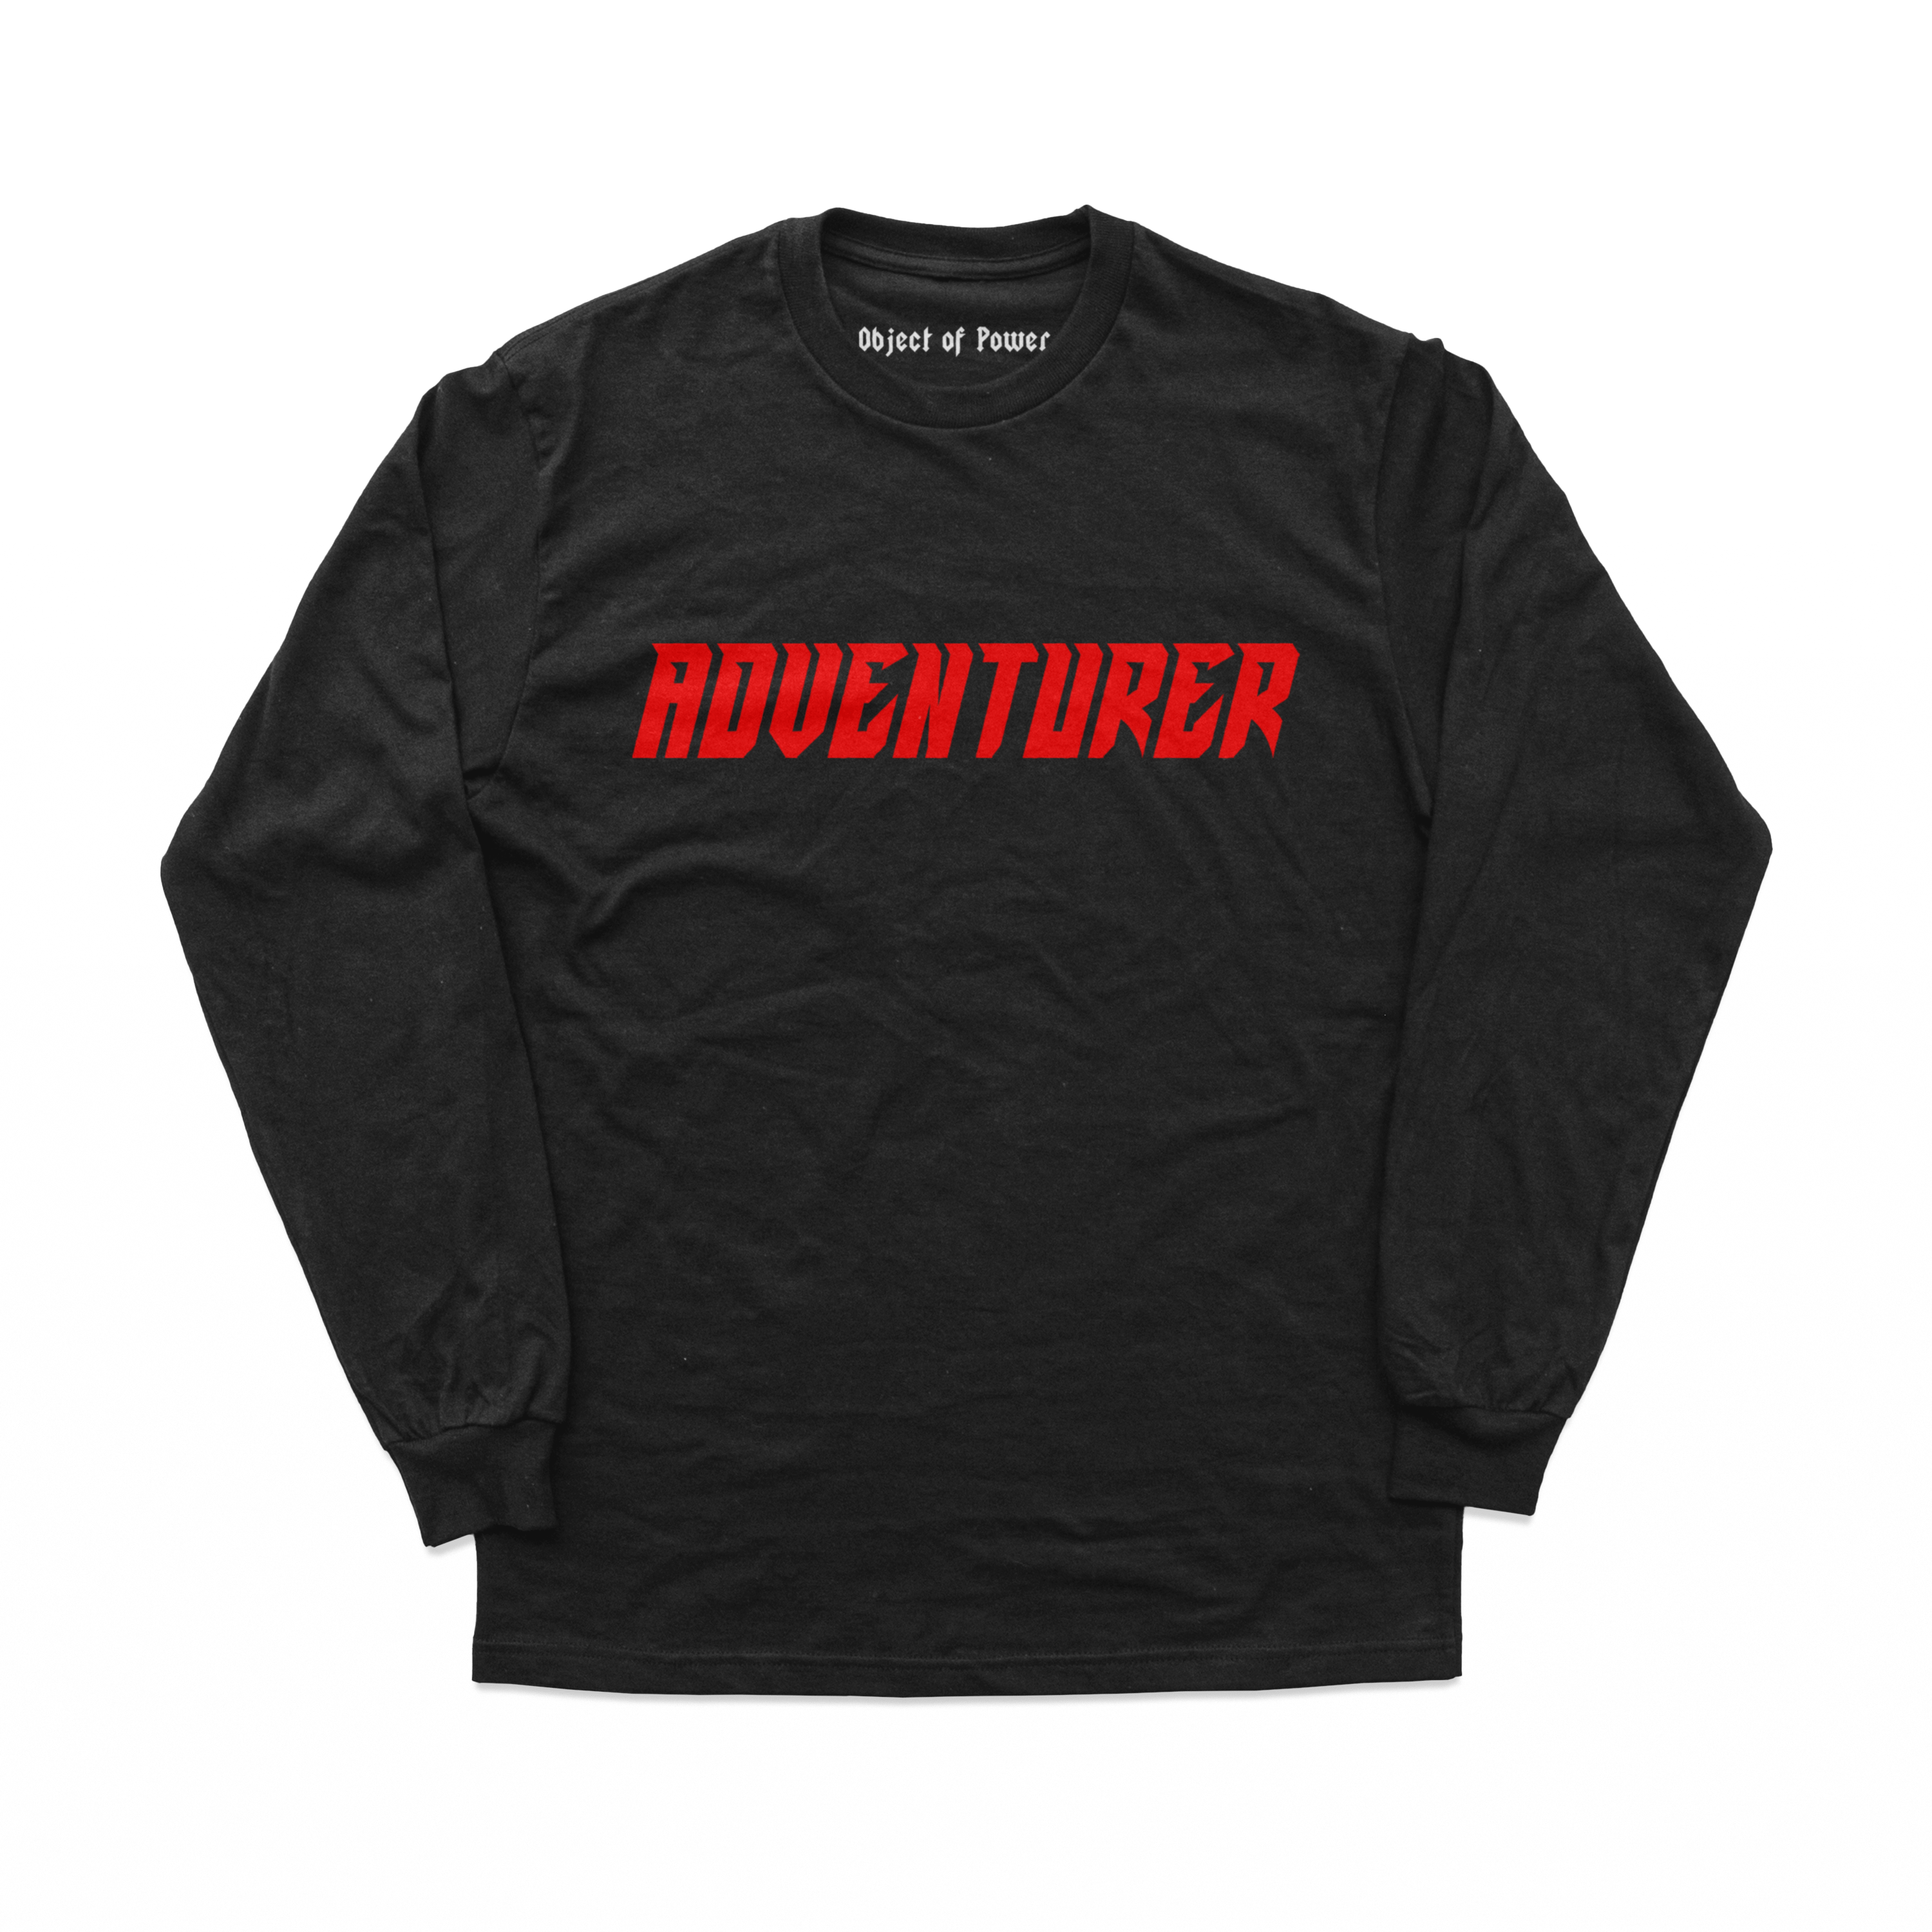 Object of Power nerdy gamer anime tabletop roleplaying Long Sleeve Tee Adventurer Long Sleeve Tee Black / XS